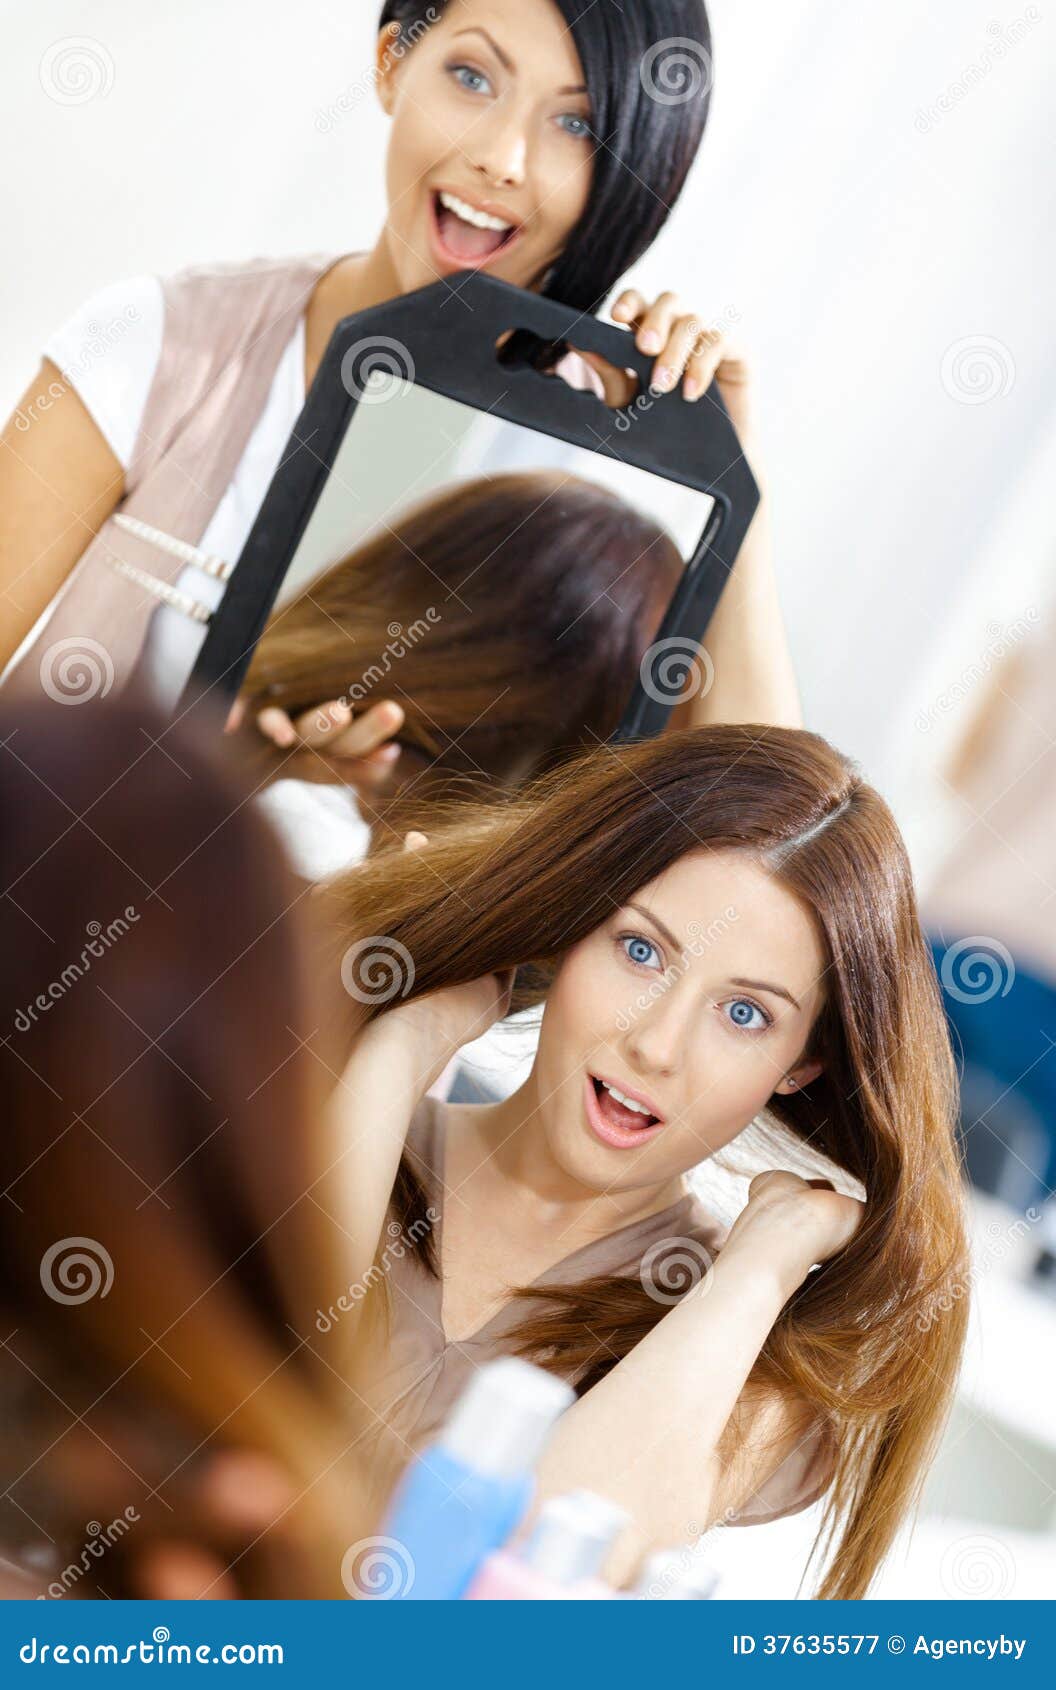 Hairdresser Showing the Hairstyle of Client in Mirror Stock Image